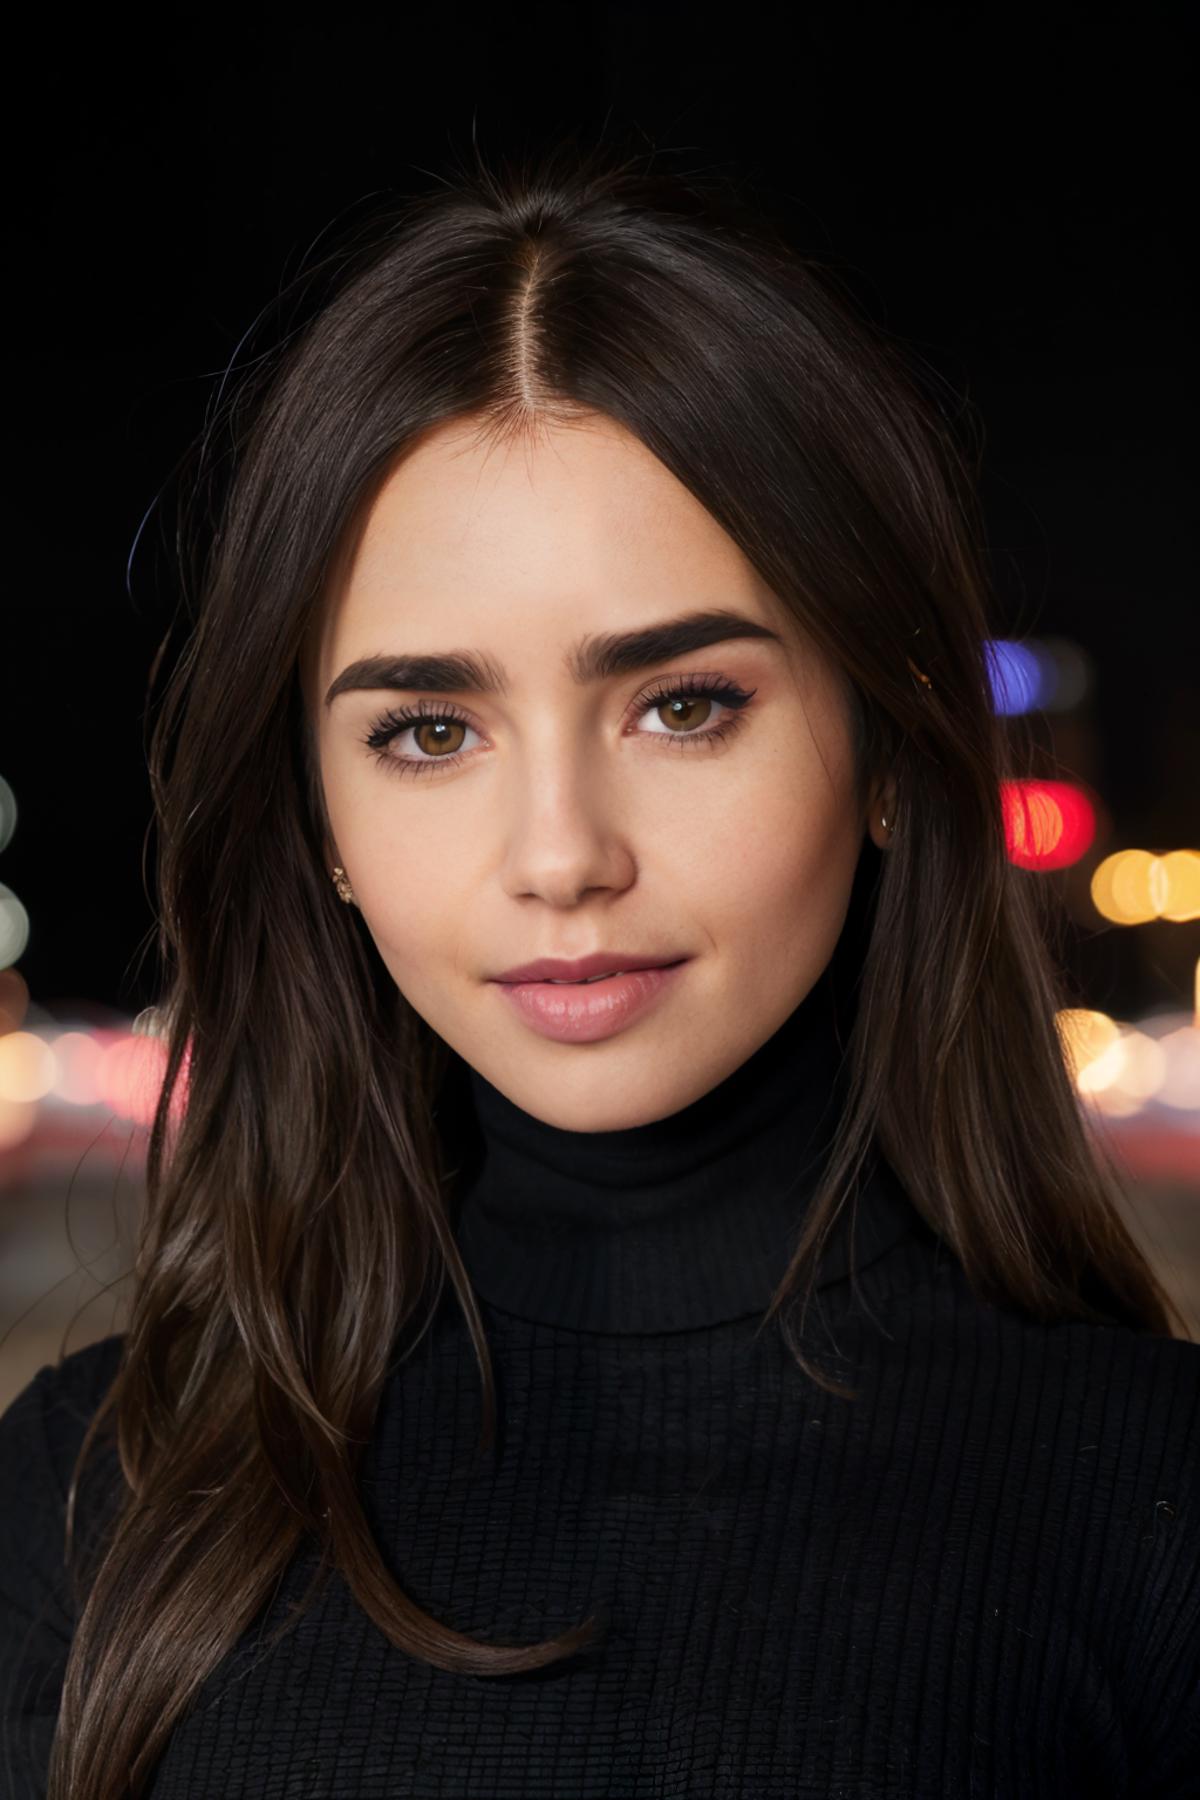 Lily Collins image by damocles_aaa